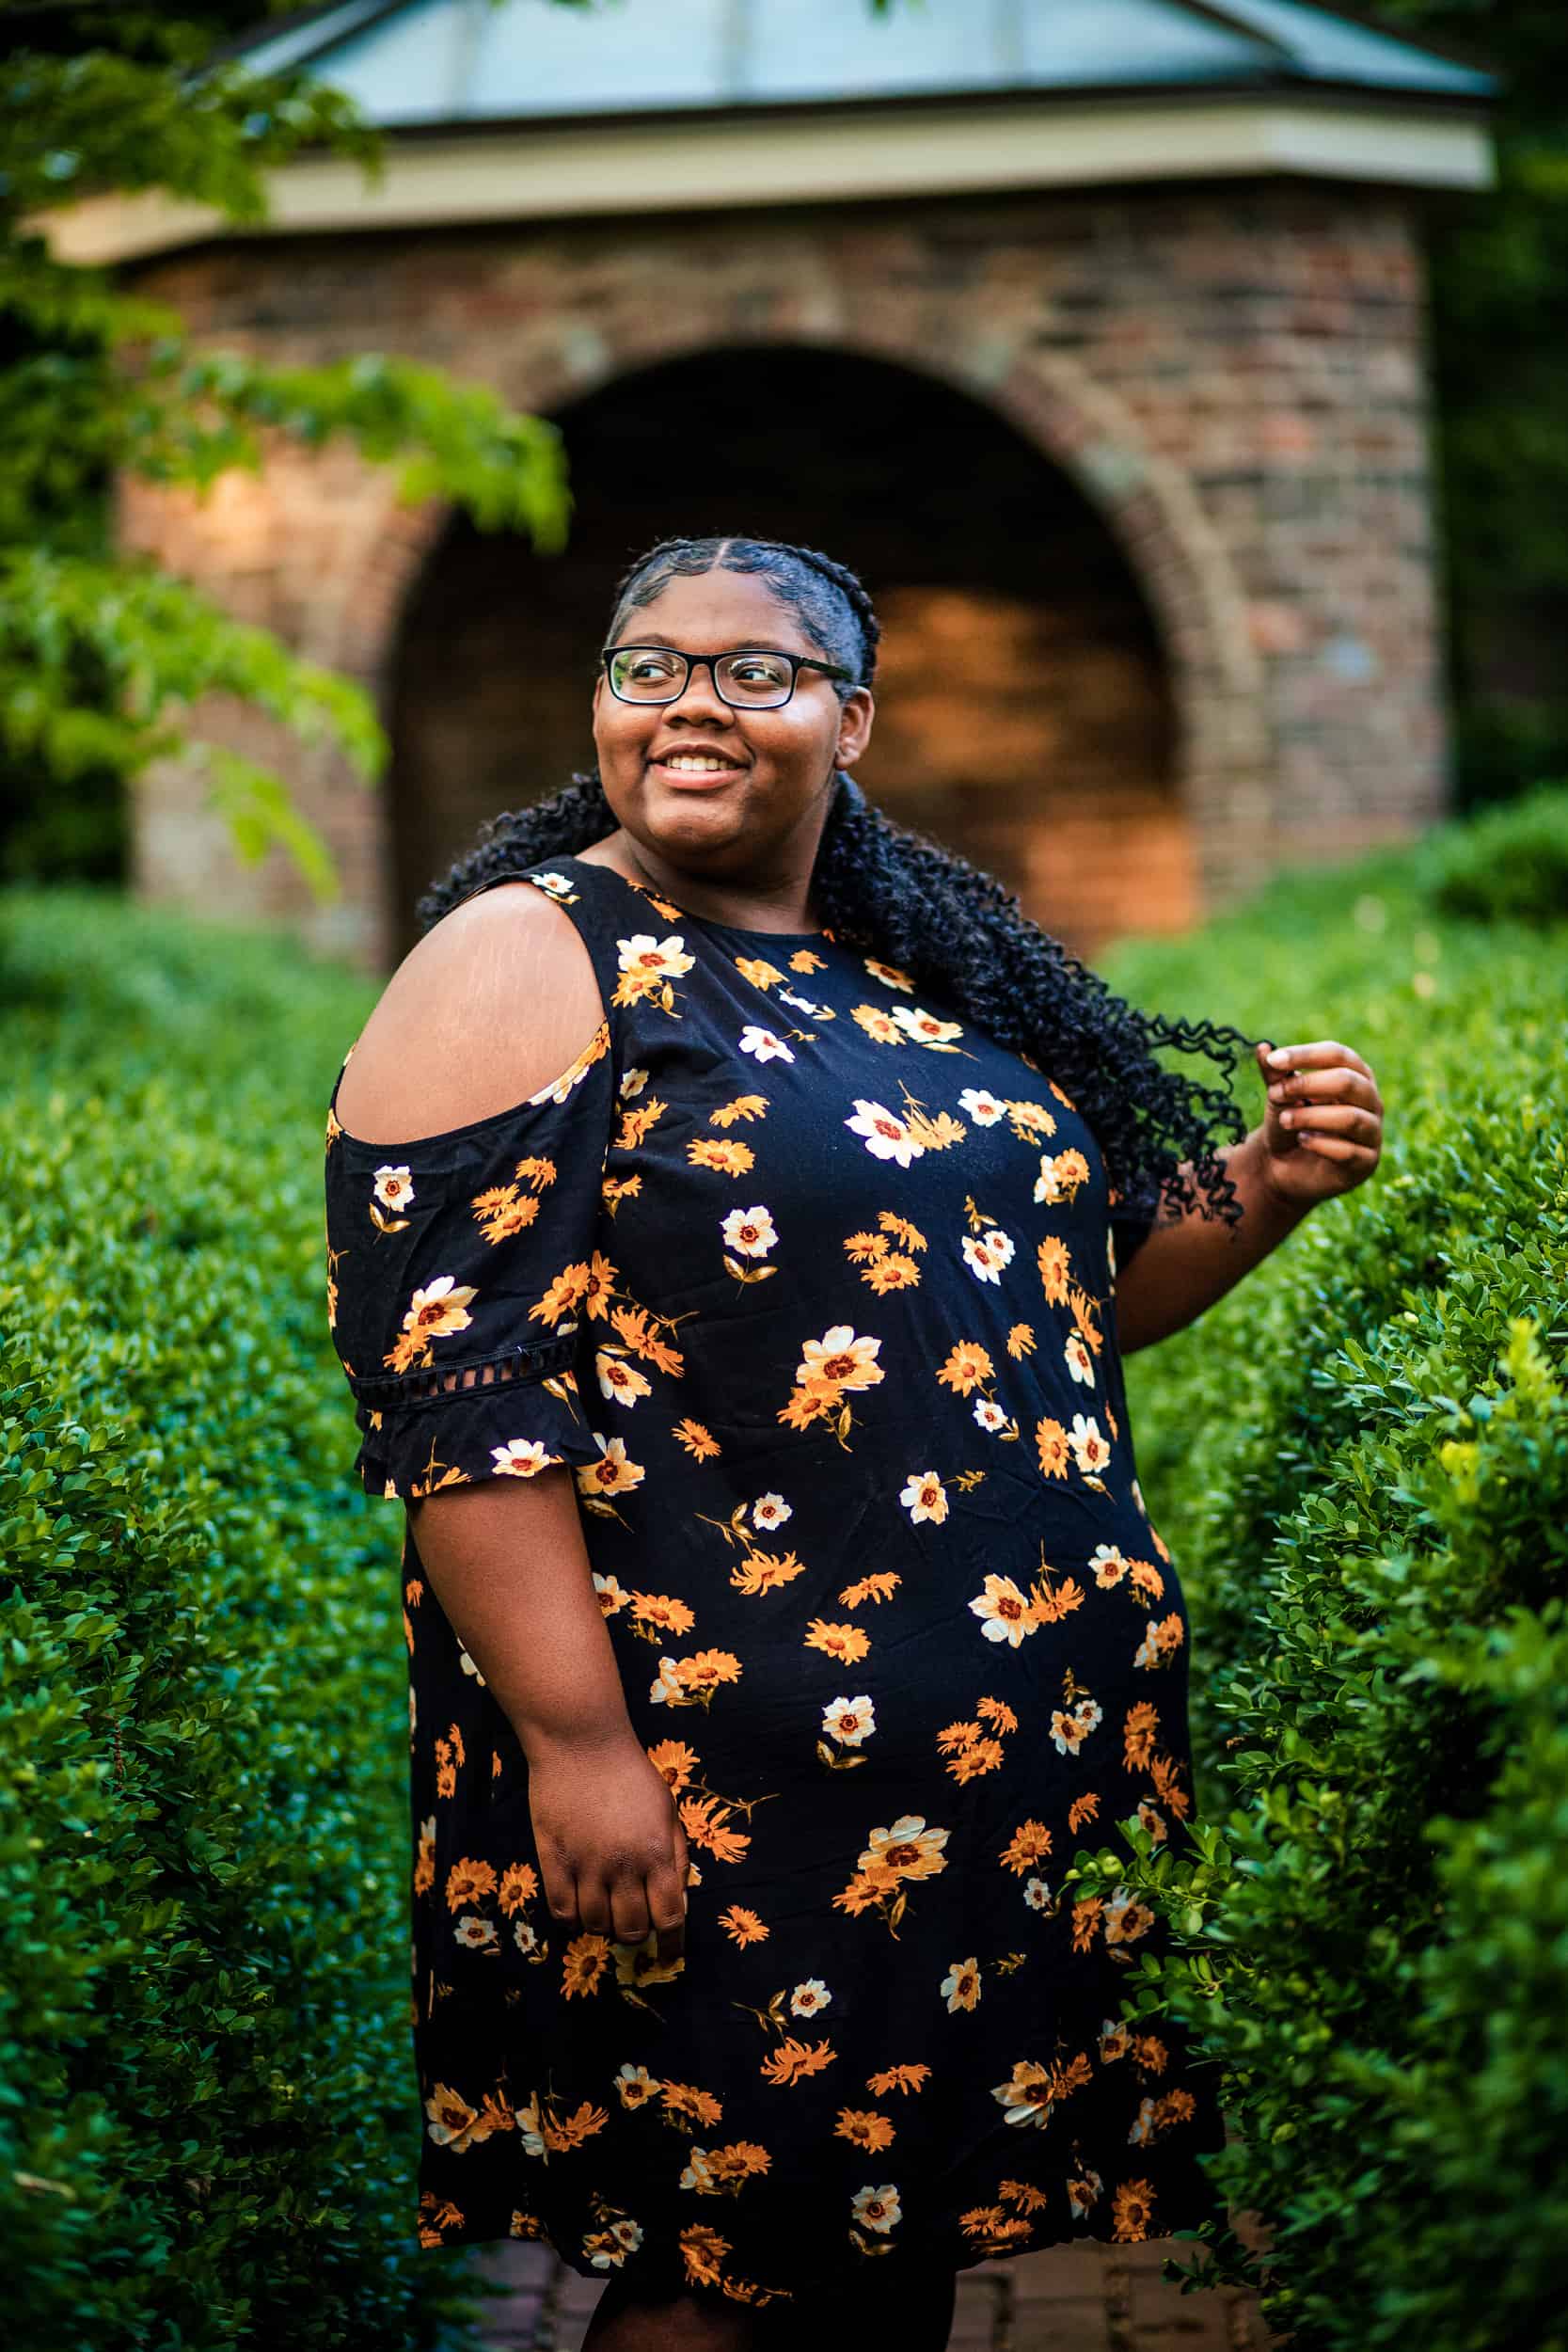 A black woman in a floral dress smiles in front of bushes.